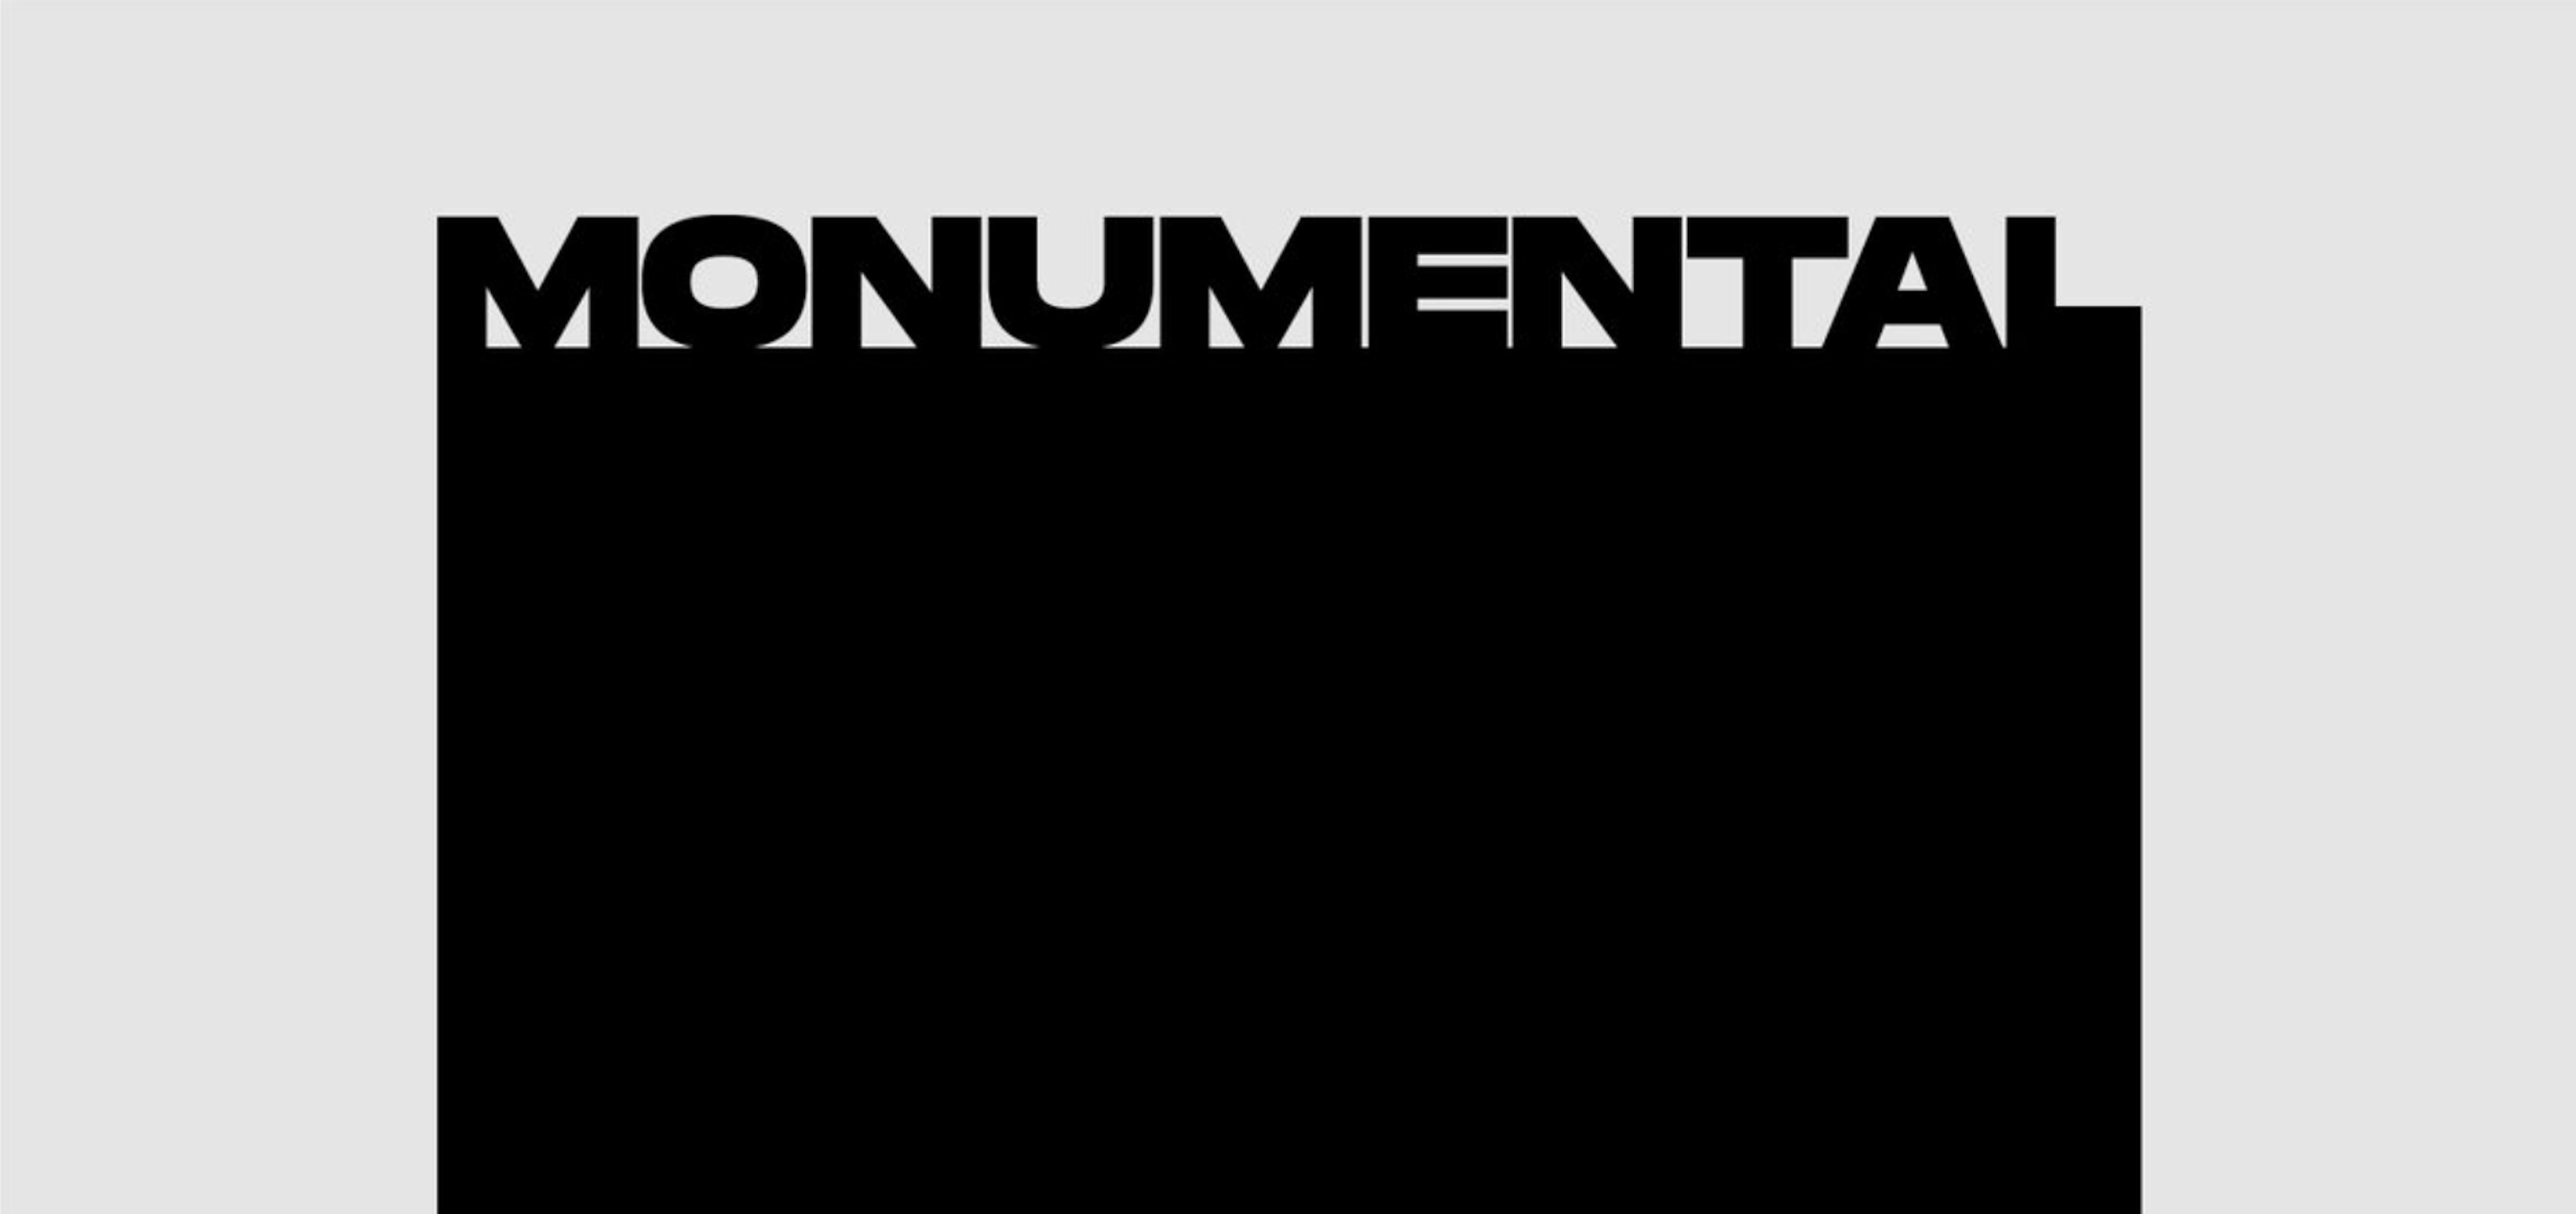 Black Cube’s ED Discusses the Concept of MONUMENTAL 